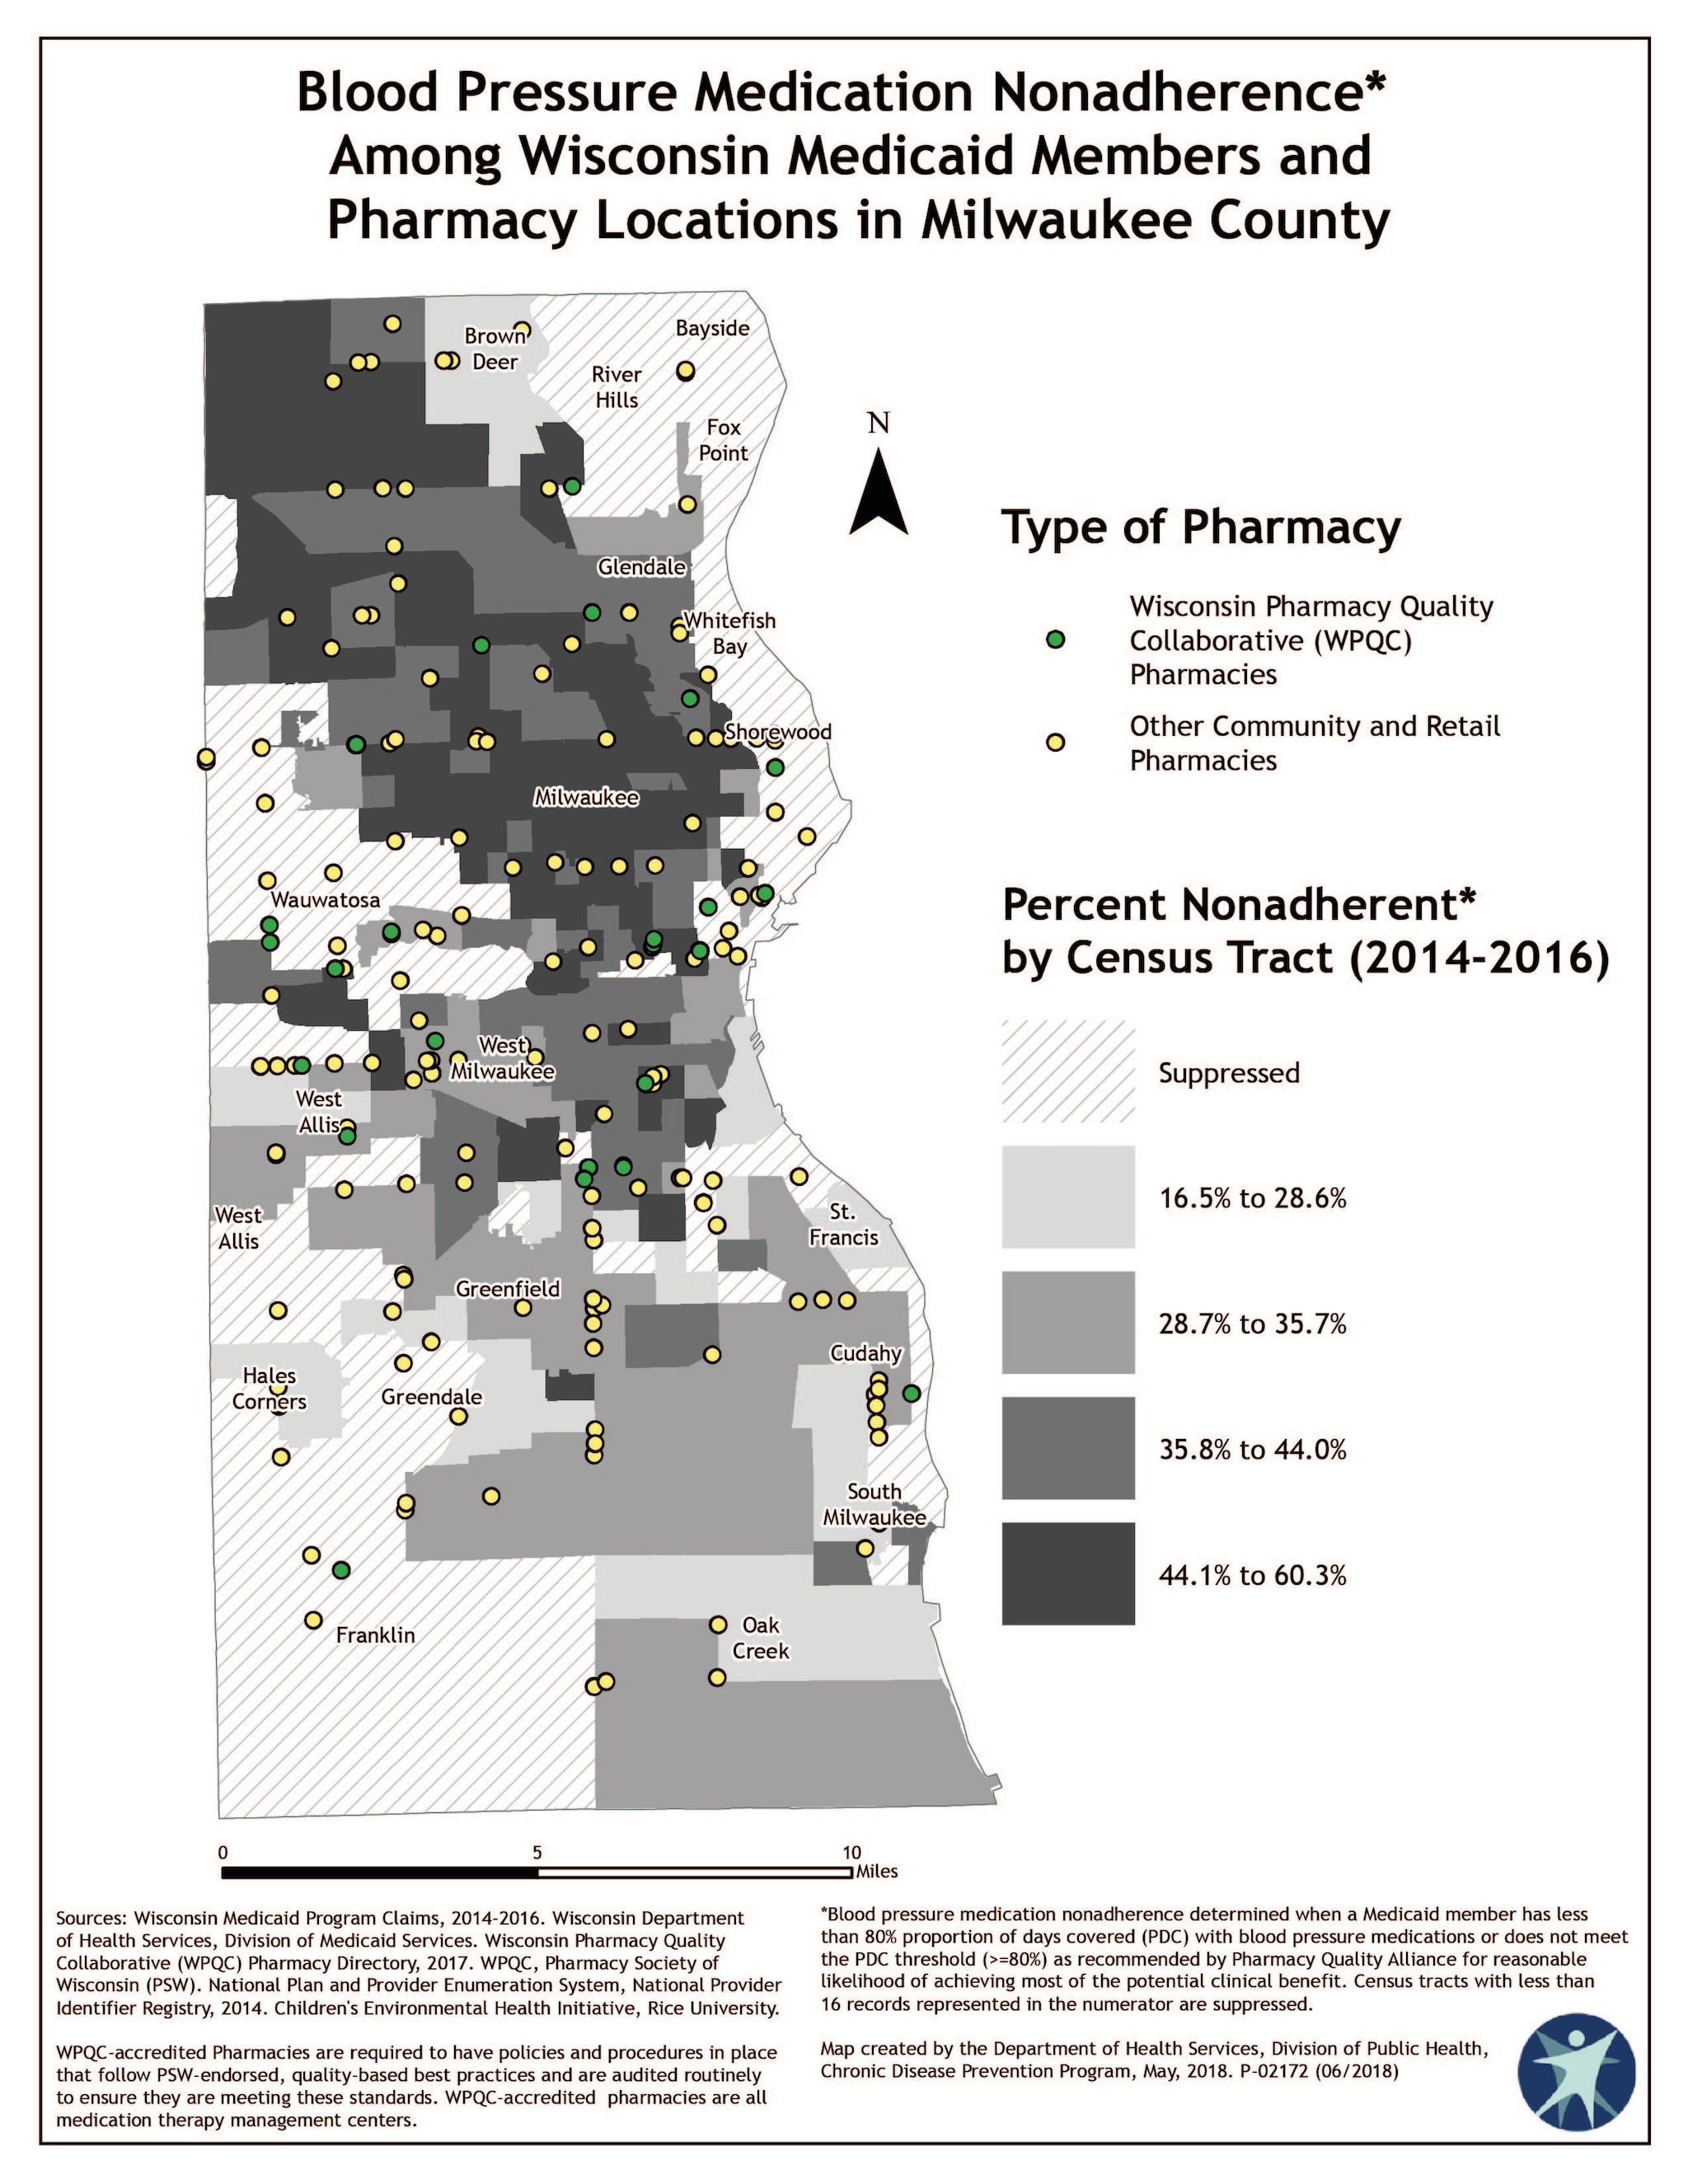 Blood Pressure Medication Nonadherence Among Medicaid Members (2014-2016) and Pharmacy Locations in Milwaukee County